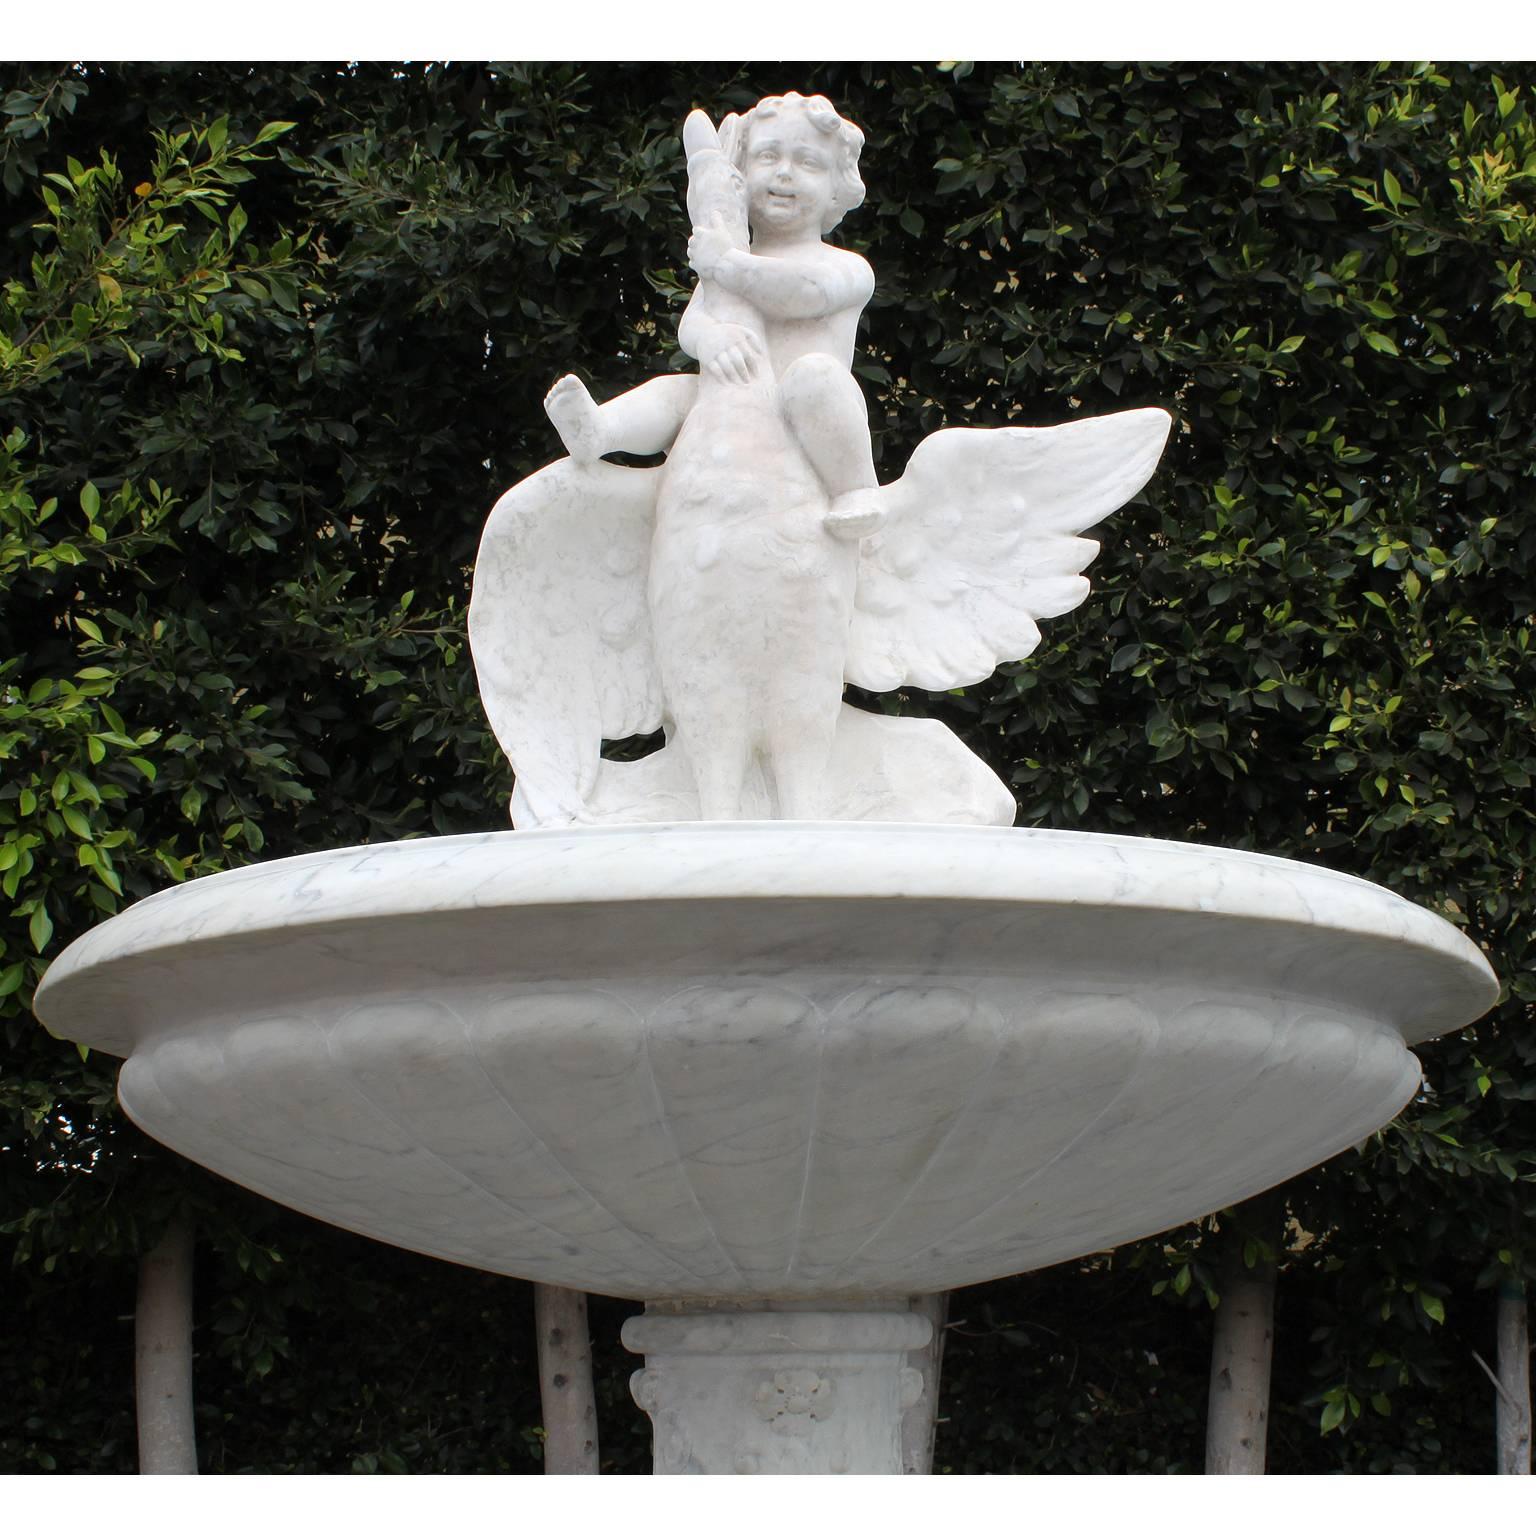 An Impressive Italian 19th century carved white marble figural fountain. The circular carved marble basin surmounted with a carved marble figure of a Putto raiding on a goose, all raised on an ornately carved pedestal stand on a square marble